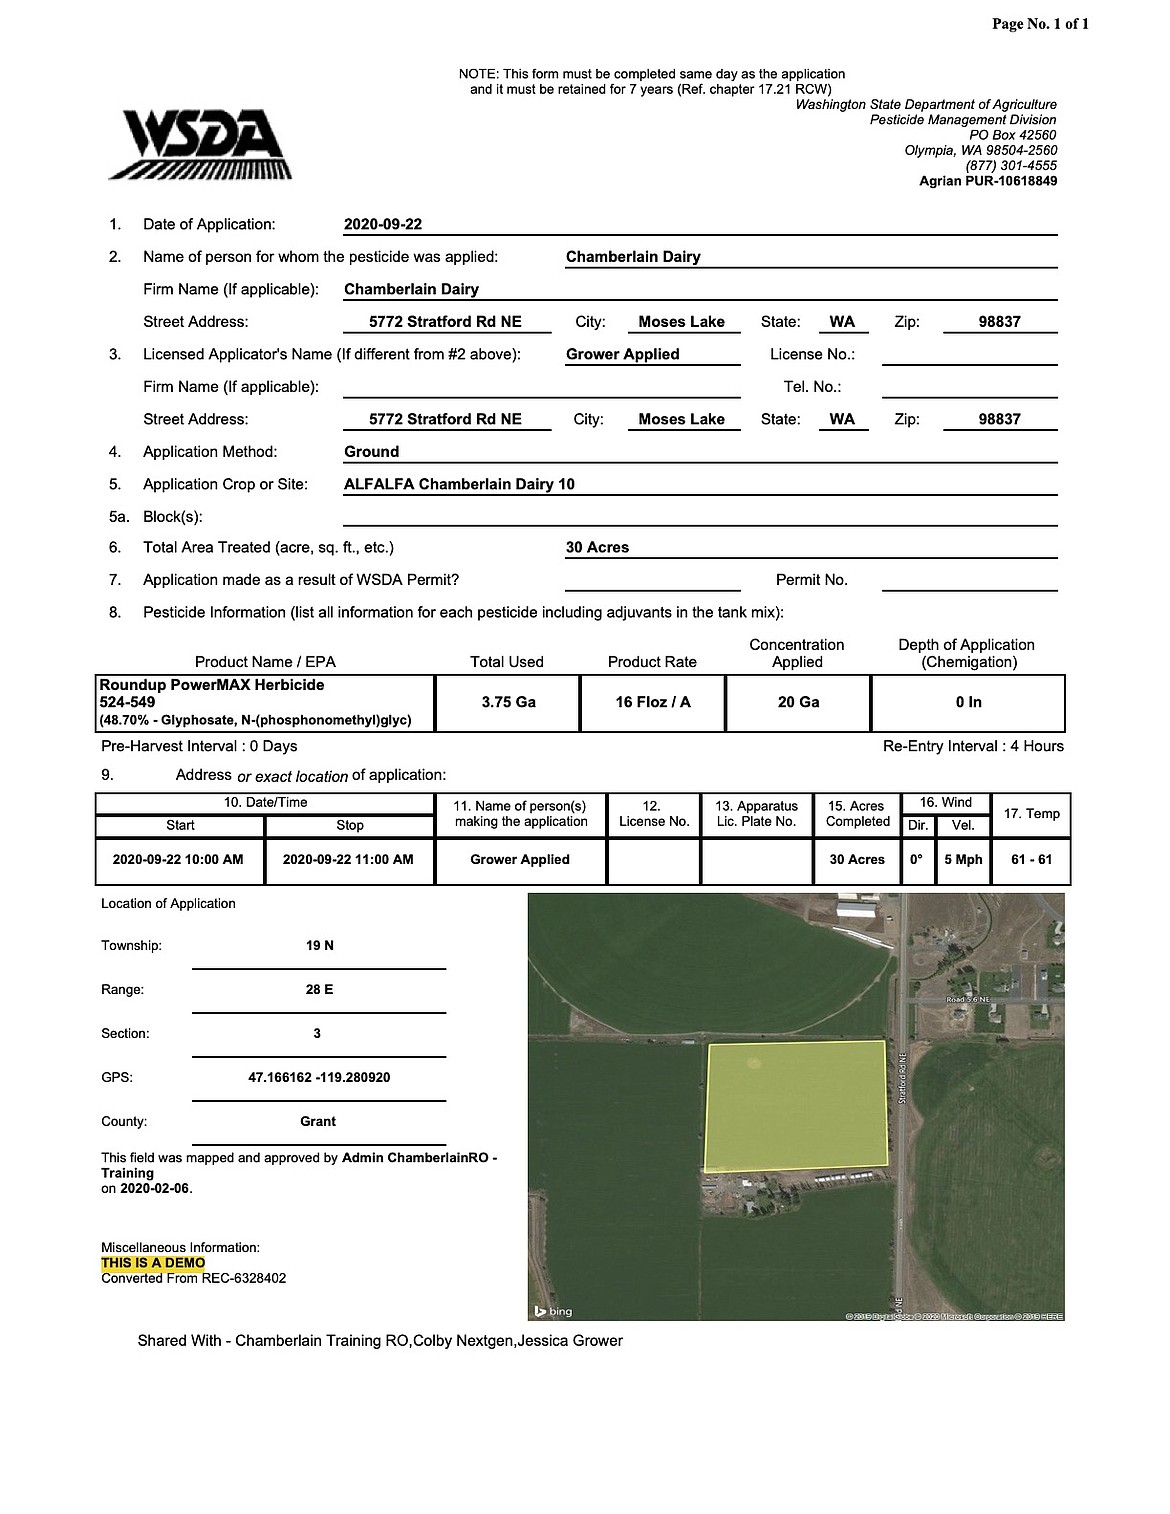 A sample dummy compliance report from the Chamberlain Dairy, showing what Agrian's software does.